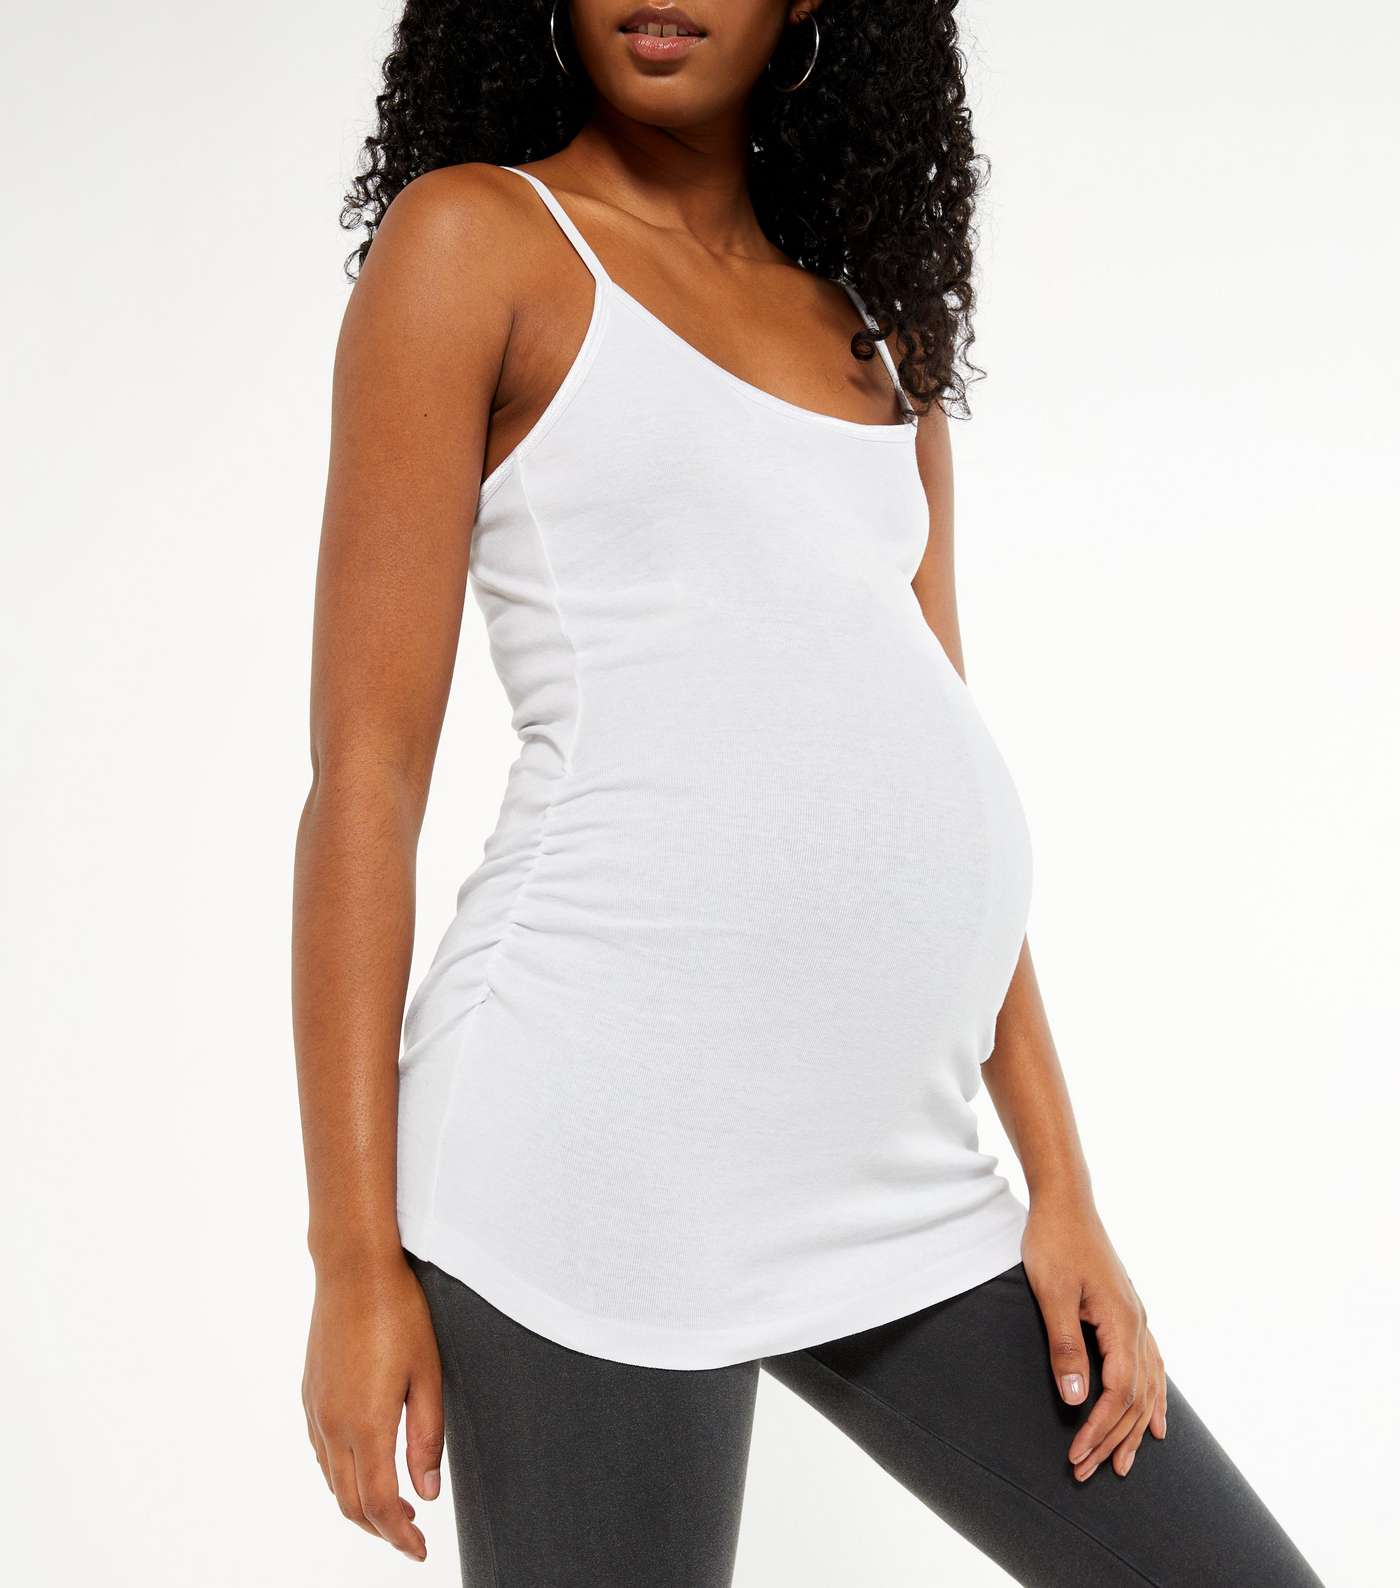 Maternity 3 Pack White Grey and Black Scoop Camis Image 4